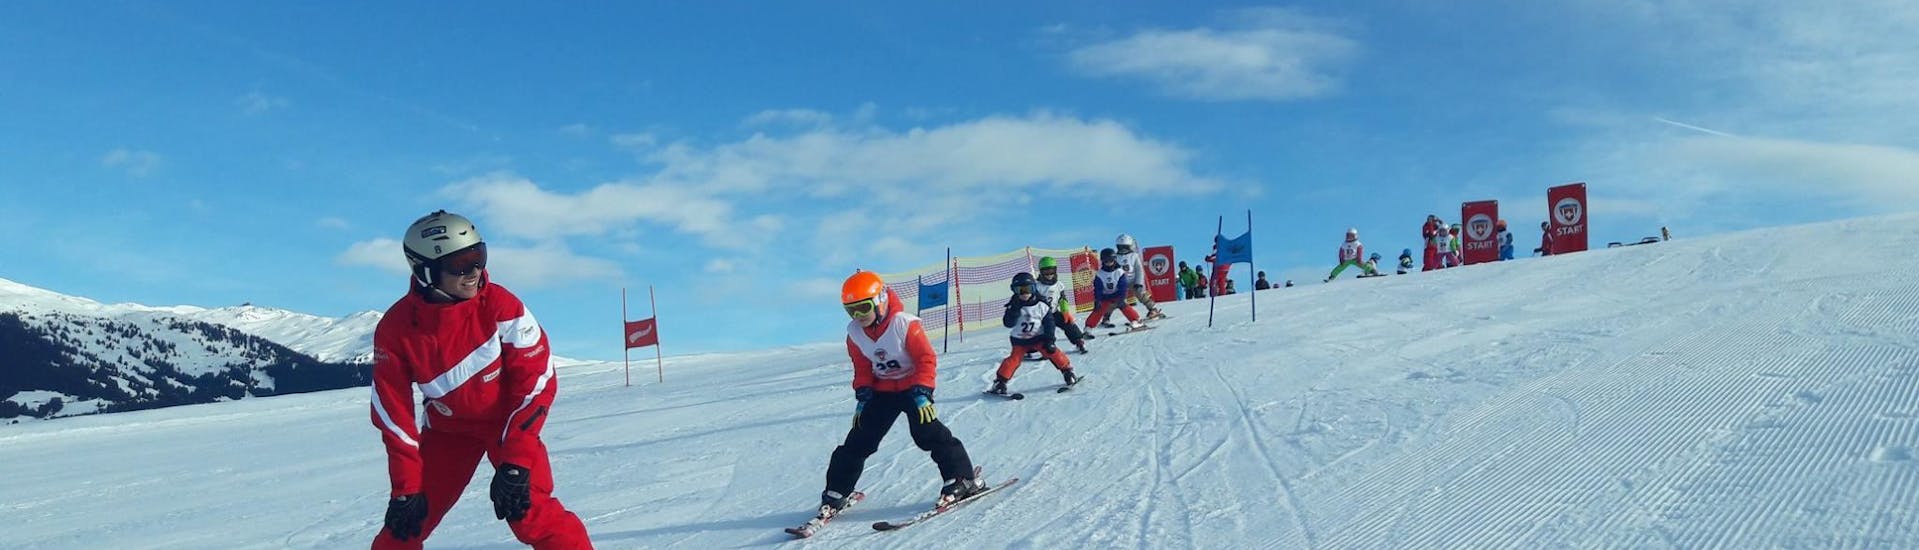 Ski Lessons for Kids (from 4 years) - Full Day - Advanced.